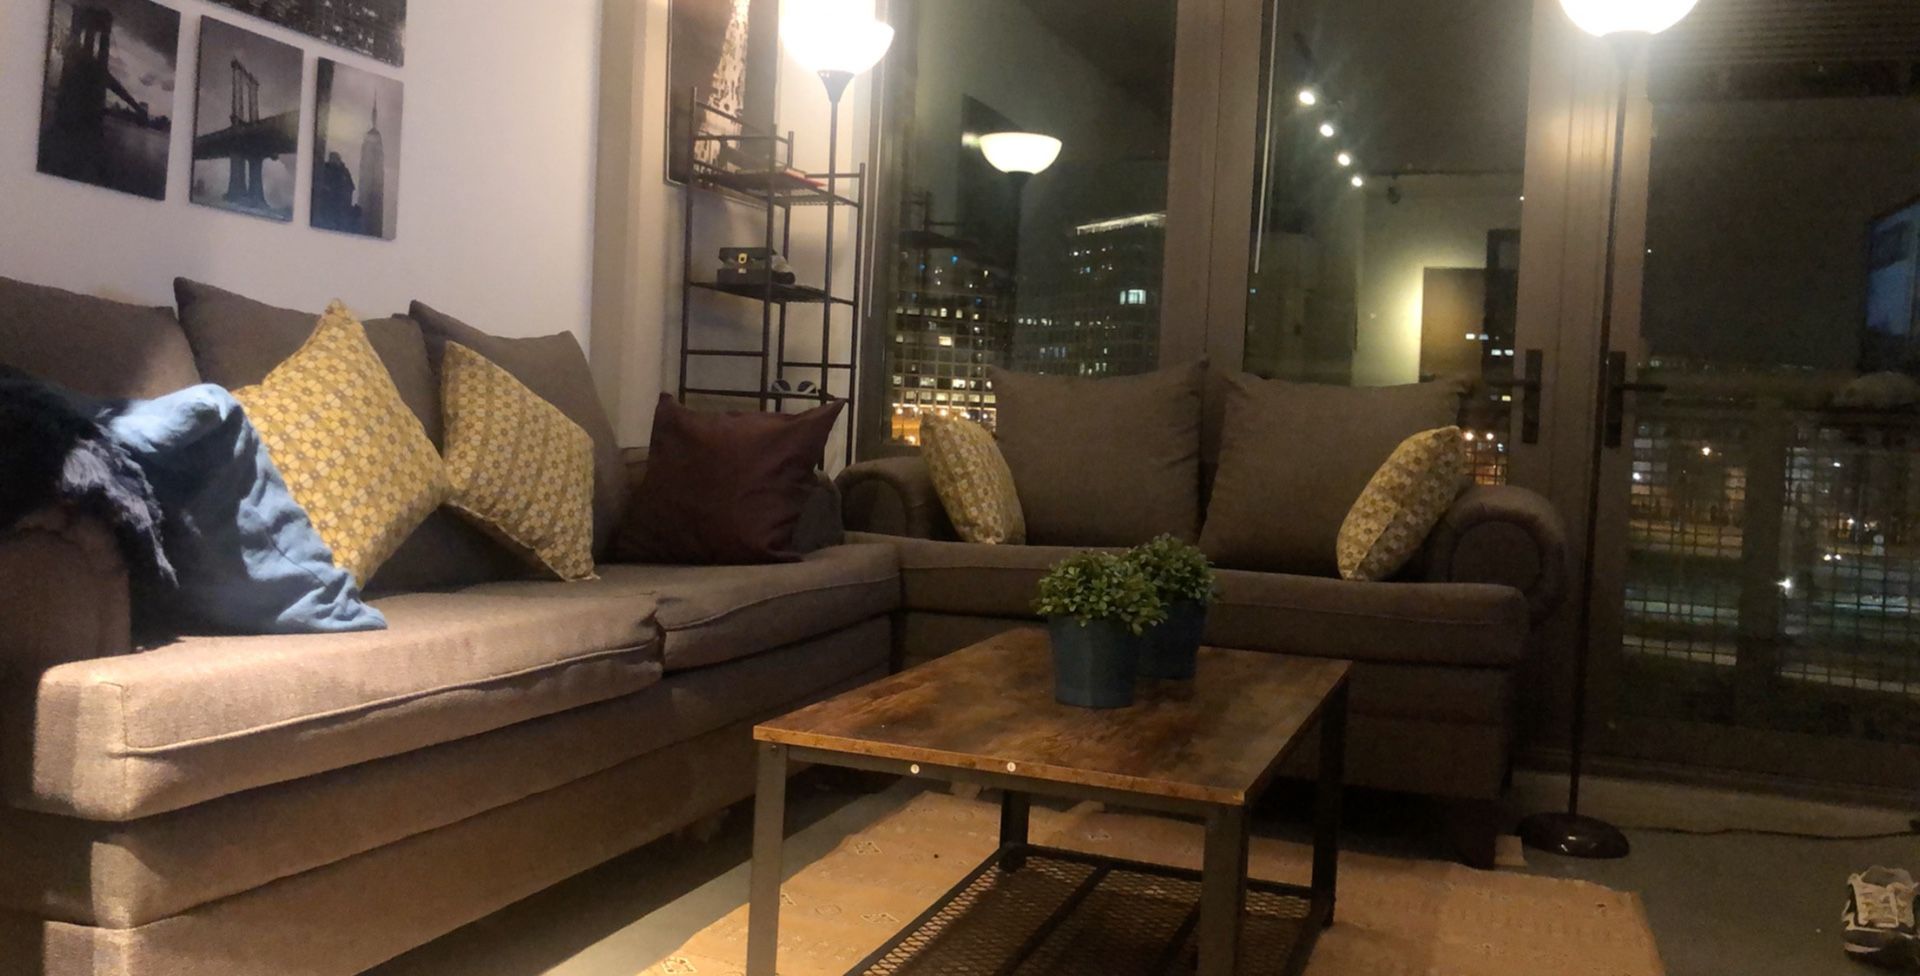 Sofa and coffee table for sale